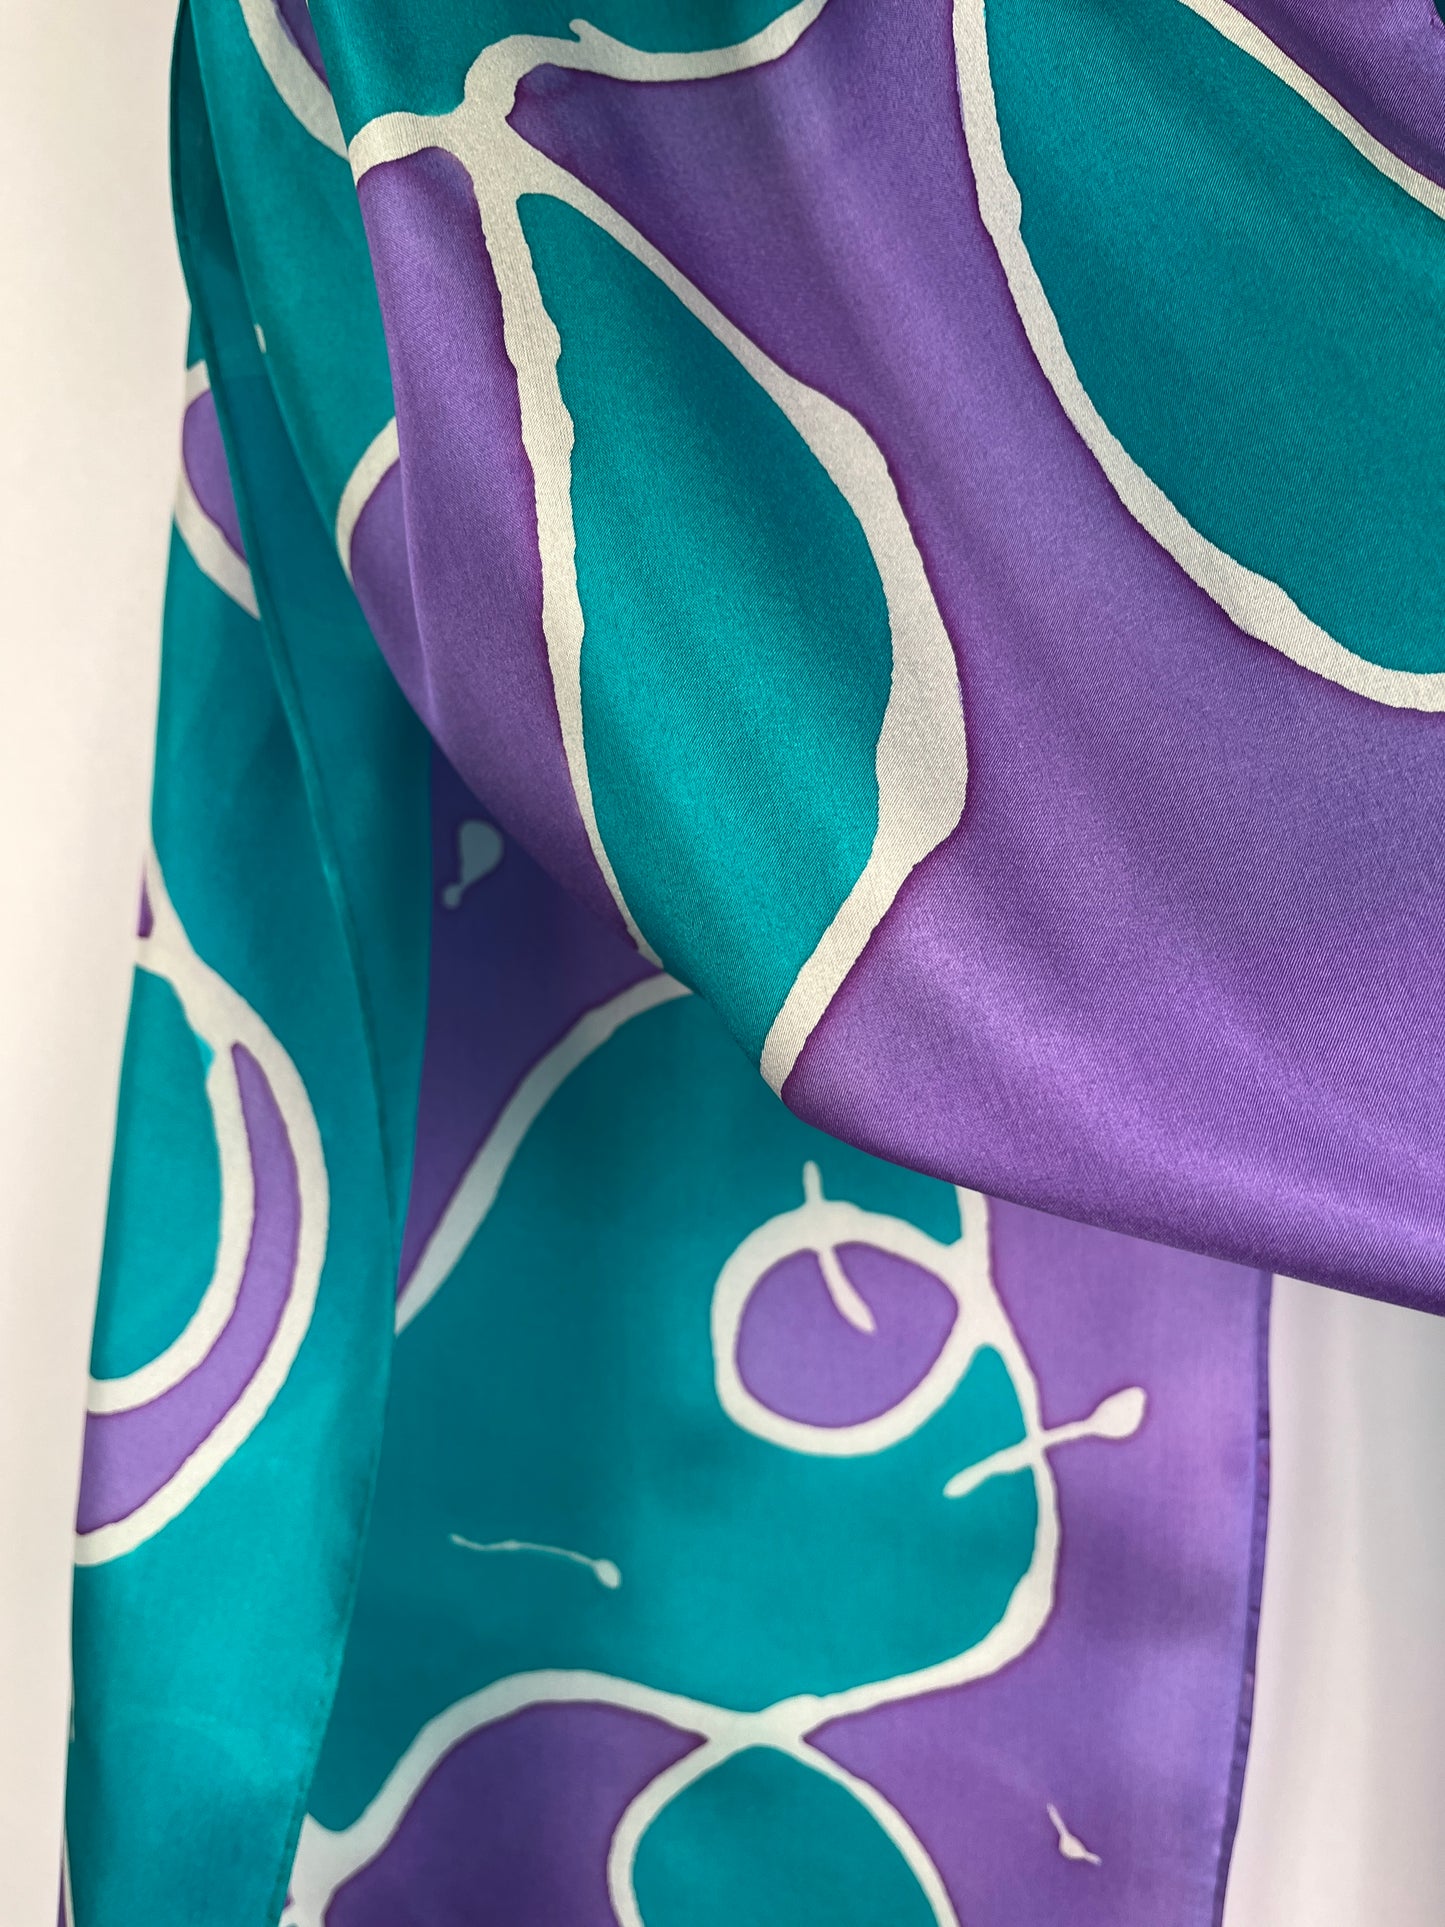 “Purple and Green Noodling” - Hand-dyed Silk Scarf - $125